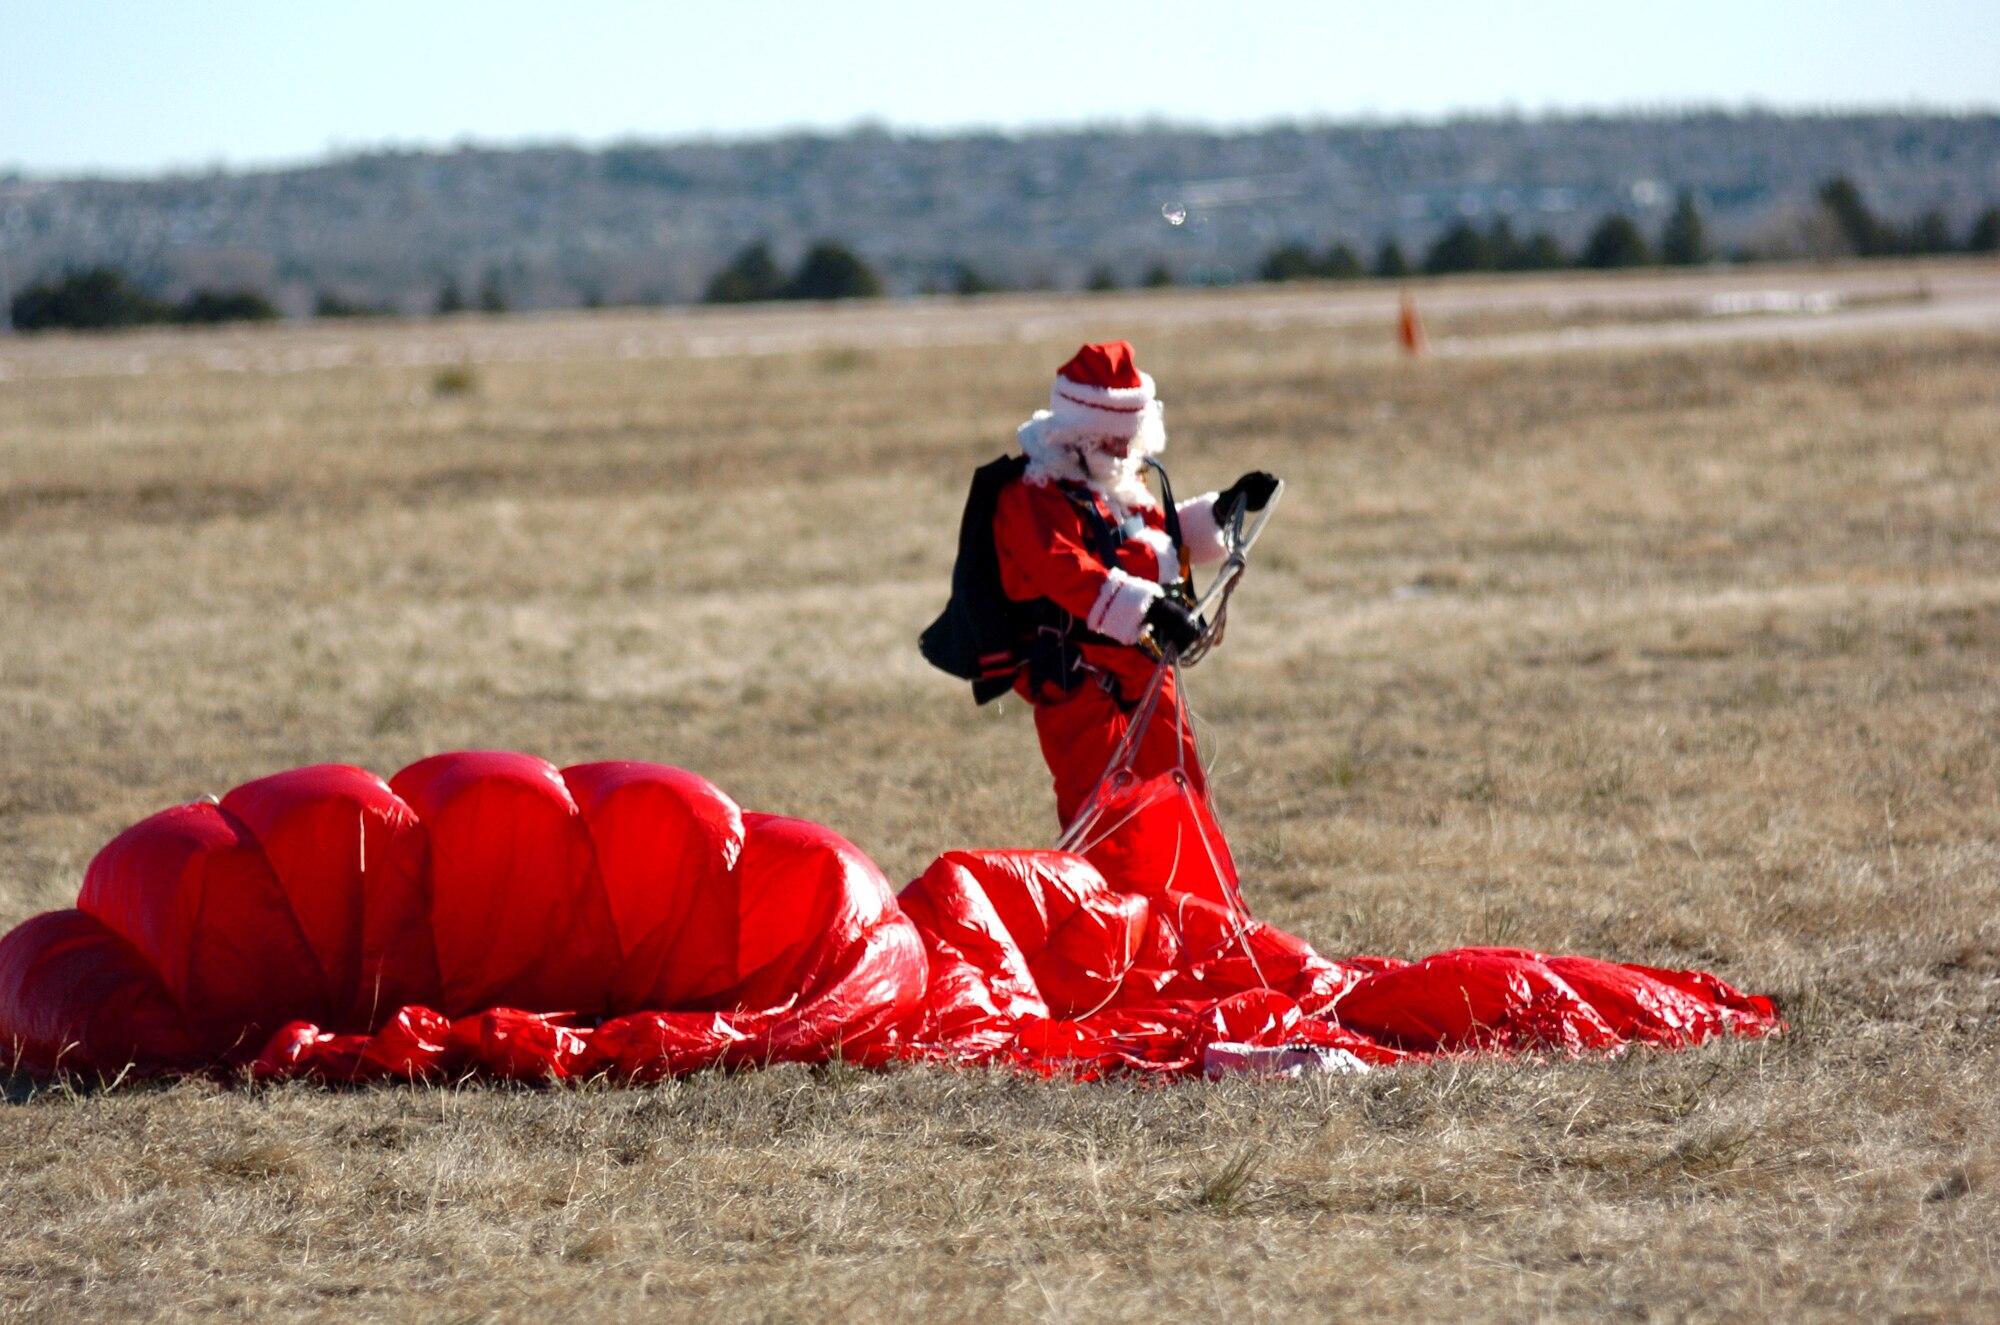 Jolly old Saint Nick gathers up his parachute after a successful jump at the U.S. Air Force Academy in Colorado Springs, Colo. Santa Claus visited the Academy Dec. 9 to learn proper egress and parachute techniques in case of a sleigh malfunction on Christmas Eve. Santa's fans can track his journey around the world on Dec. 24 at North American Aerospace Defense Command's special Web site www.noradsanta.org.The site also features the history of NORAD Tracks Santa program, has interactive games and more. (U.S. Air Force photo/1st Lt. John Ross)
